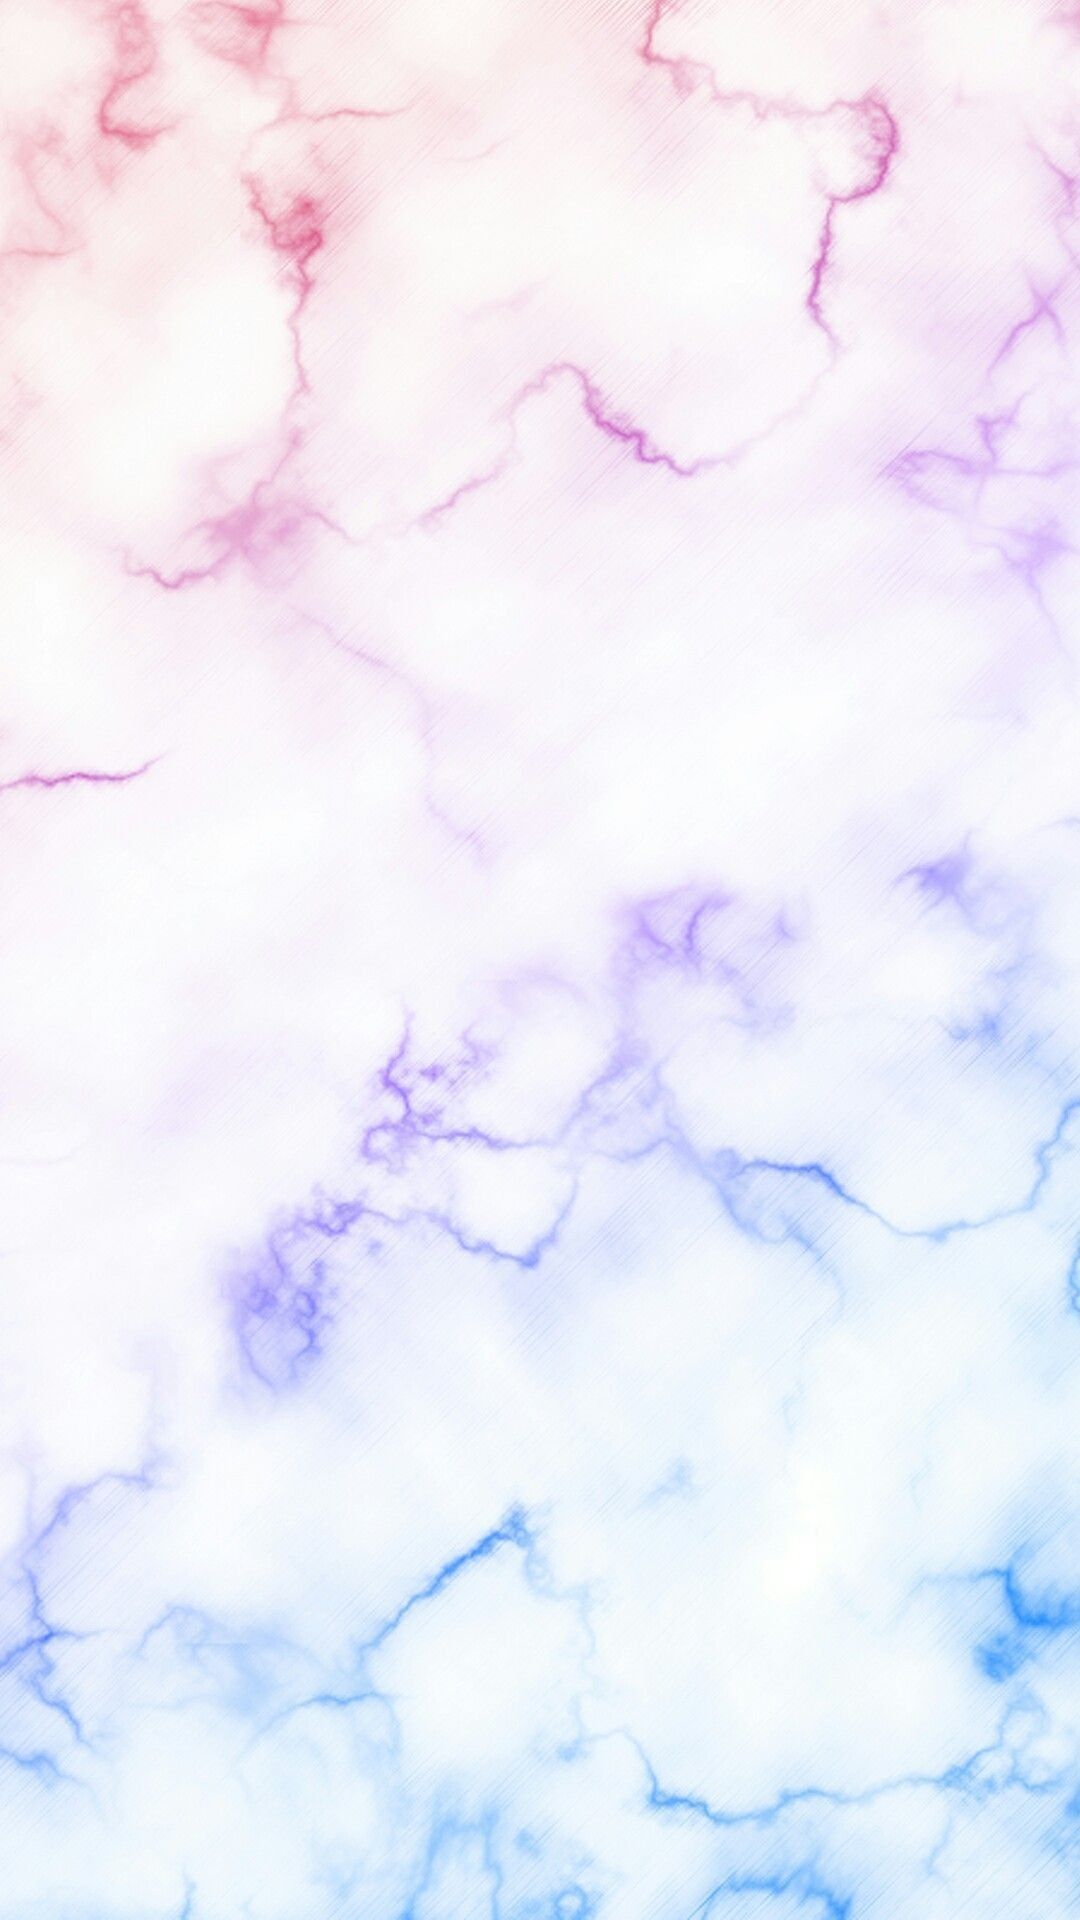 A pink and blue marble texture - Marble, pastel rainbow